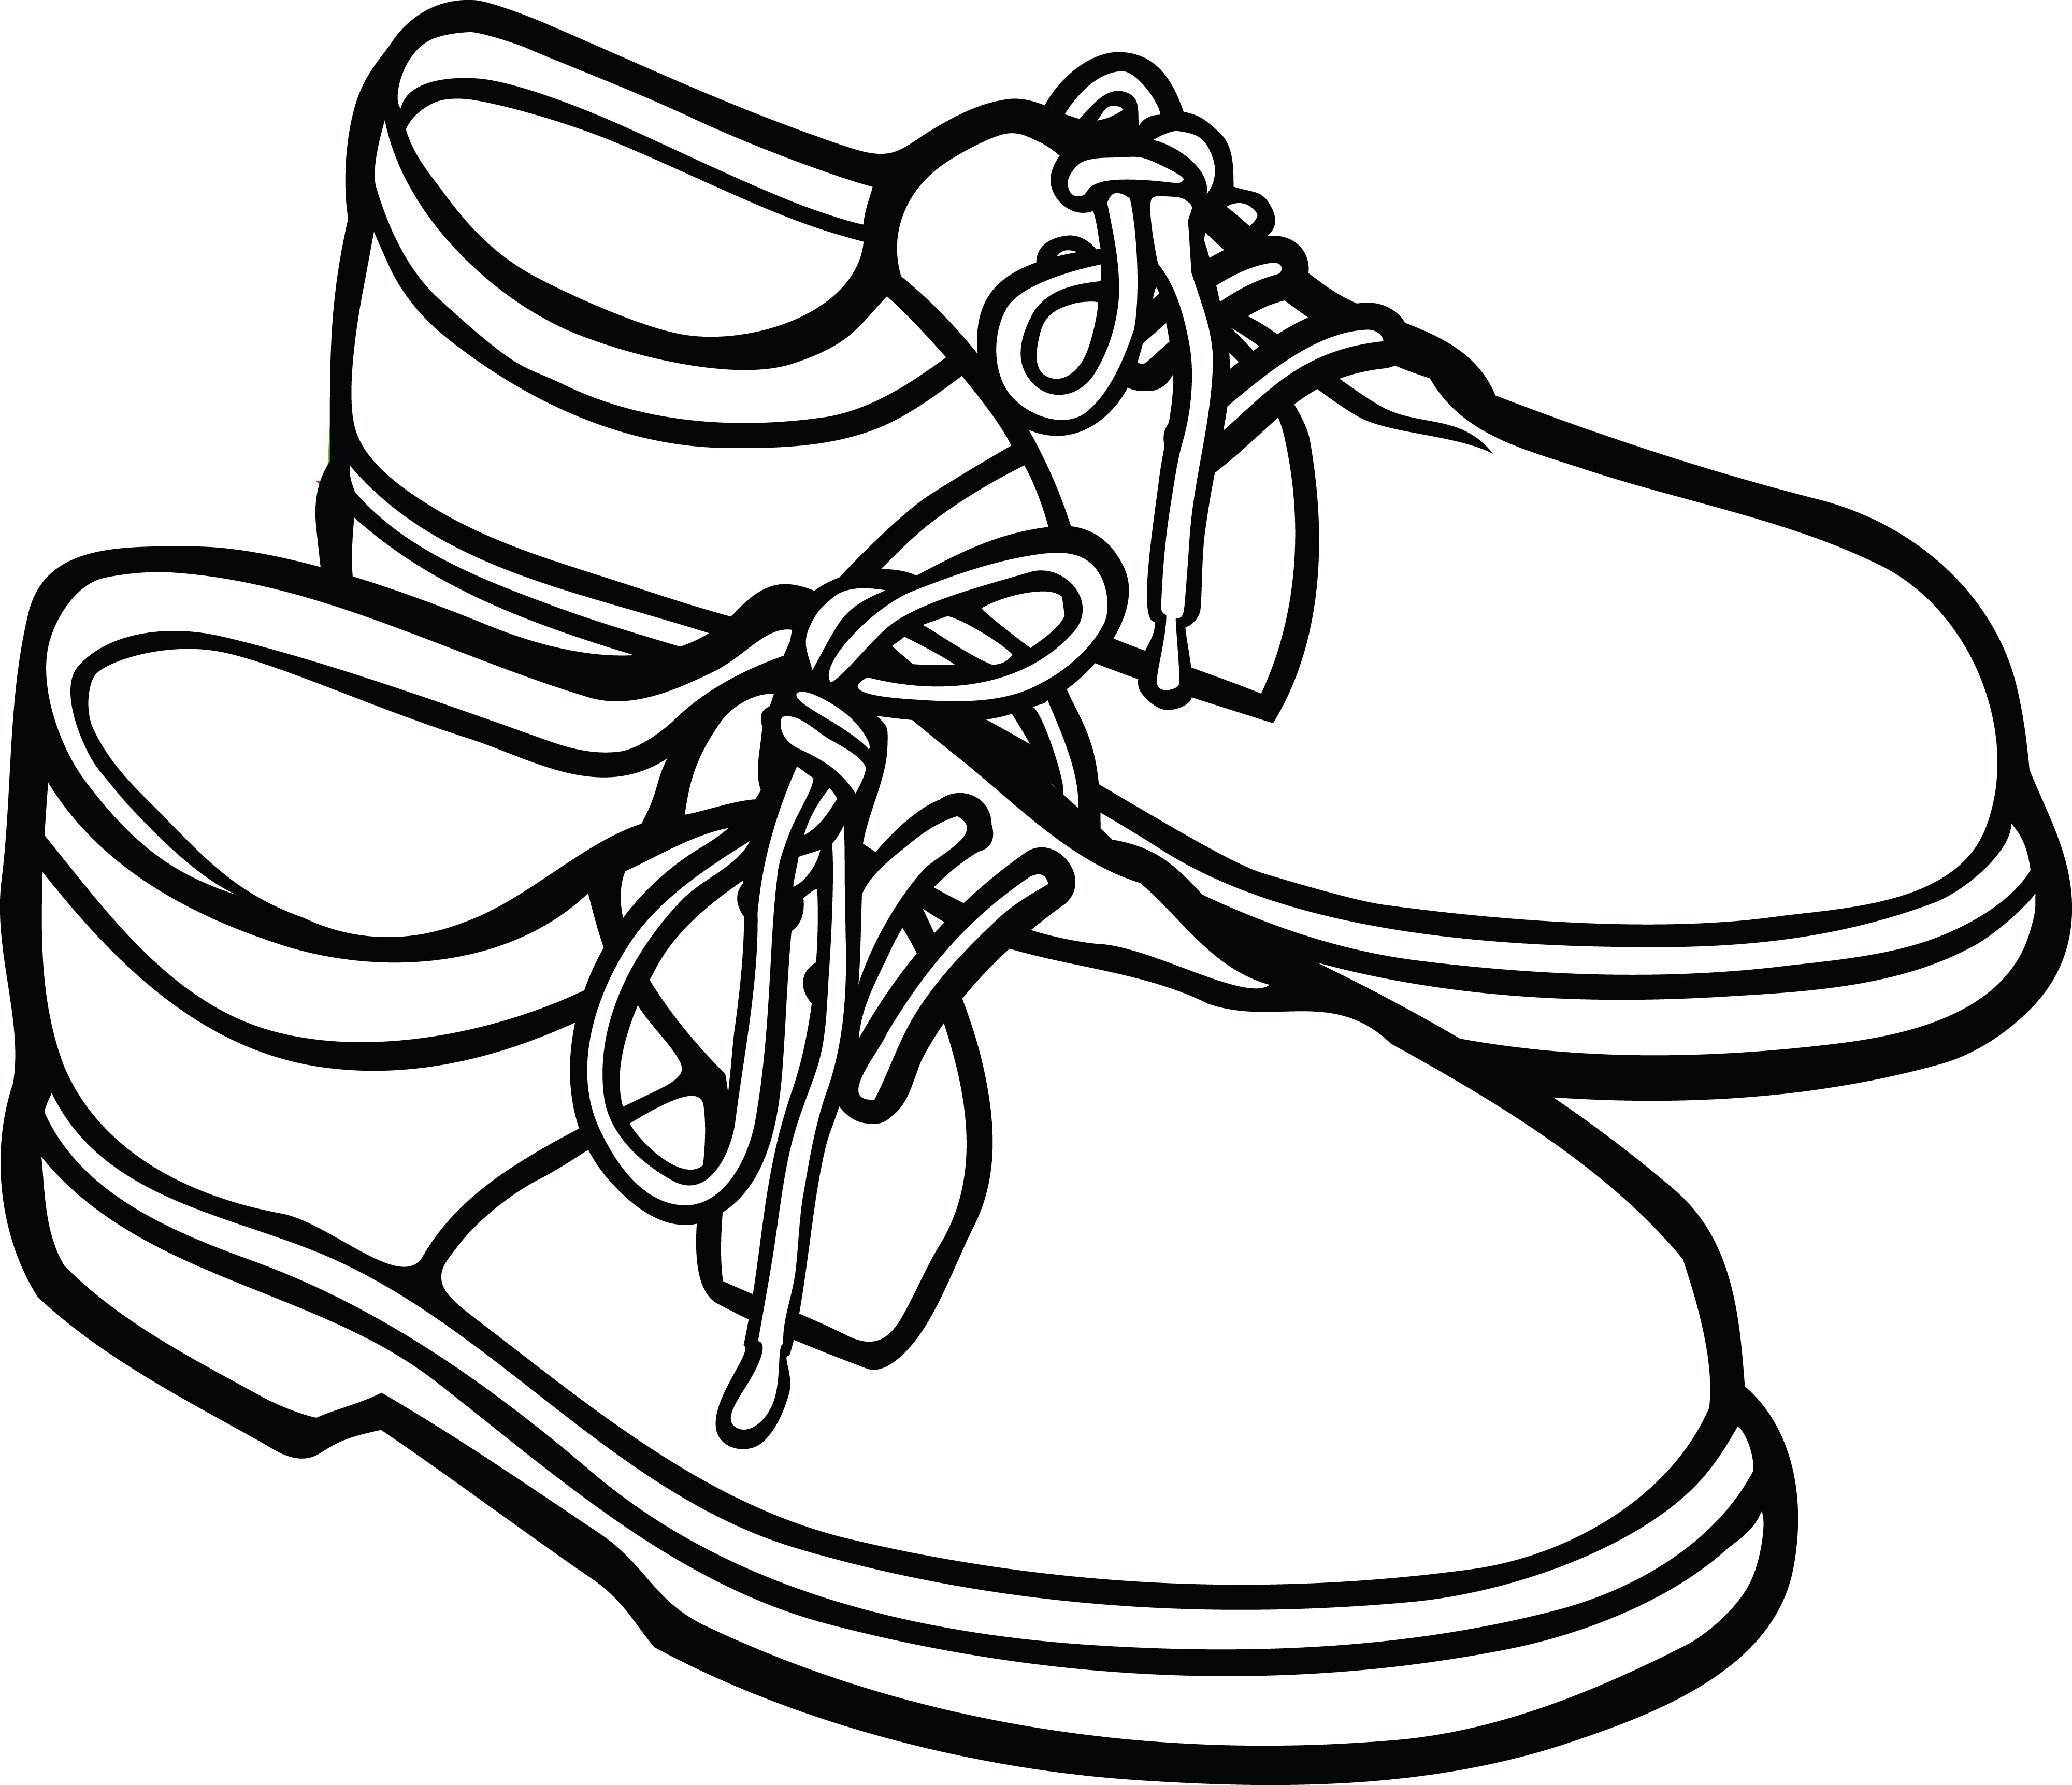 Free Black And White Shoes Clipart, Download Free Clip Art